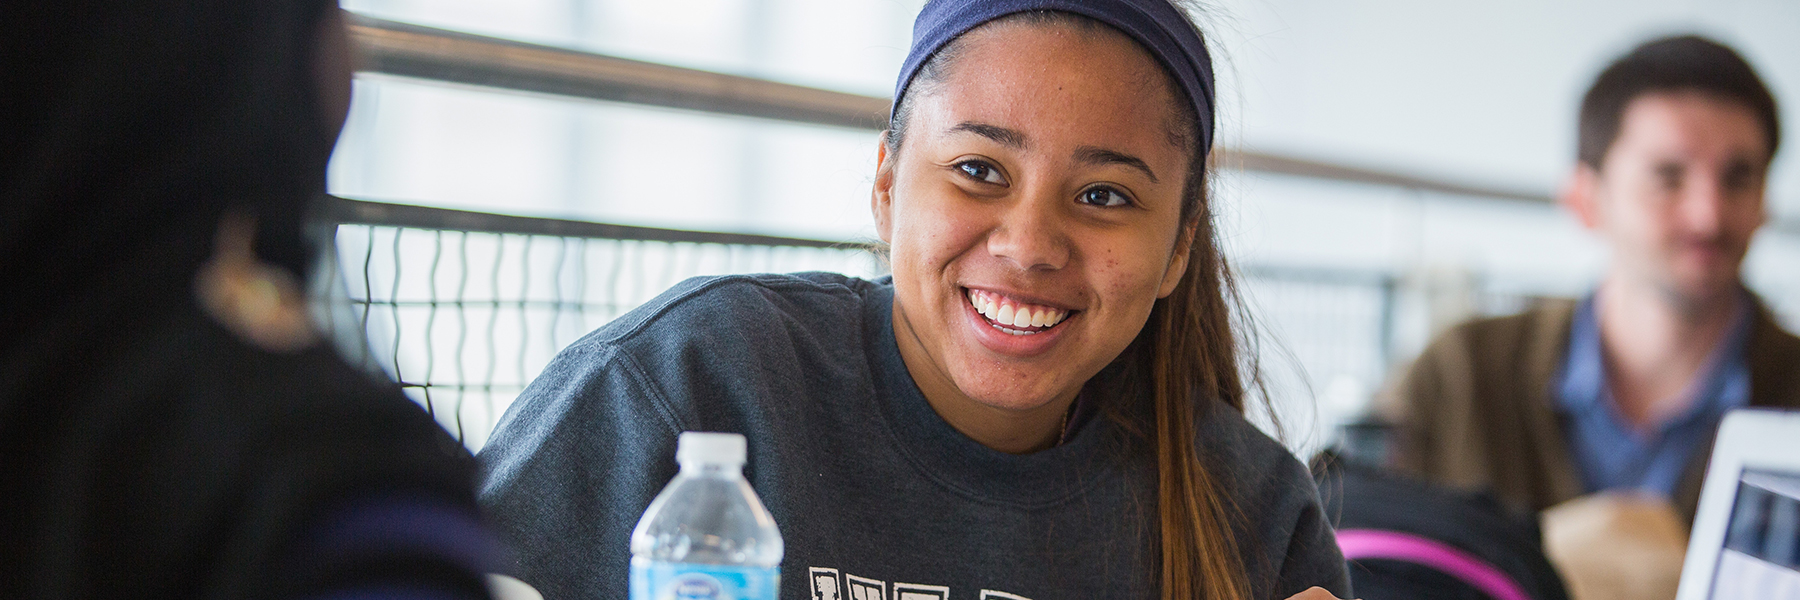 Student in the campus center with a smile on their face.